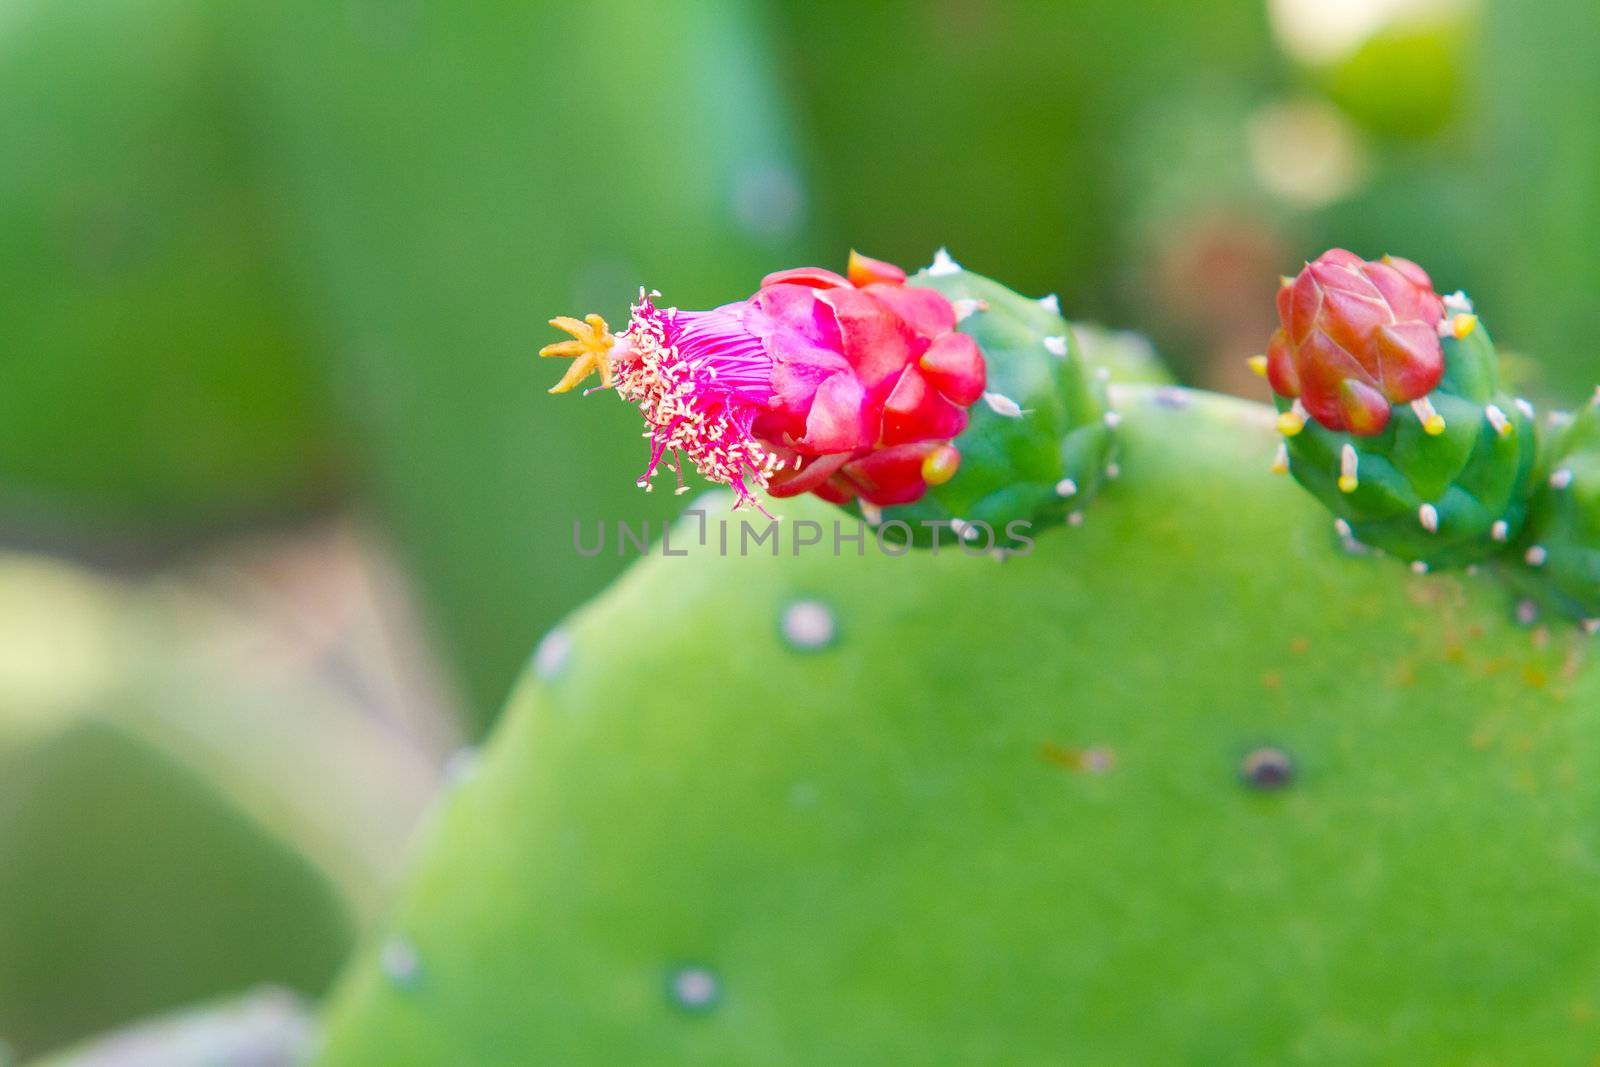 Beautiful pink and red blossoms of flowers on this cactus in the tropical location of Hawaii.